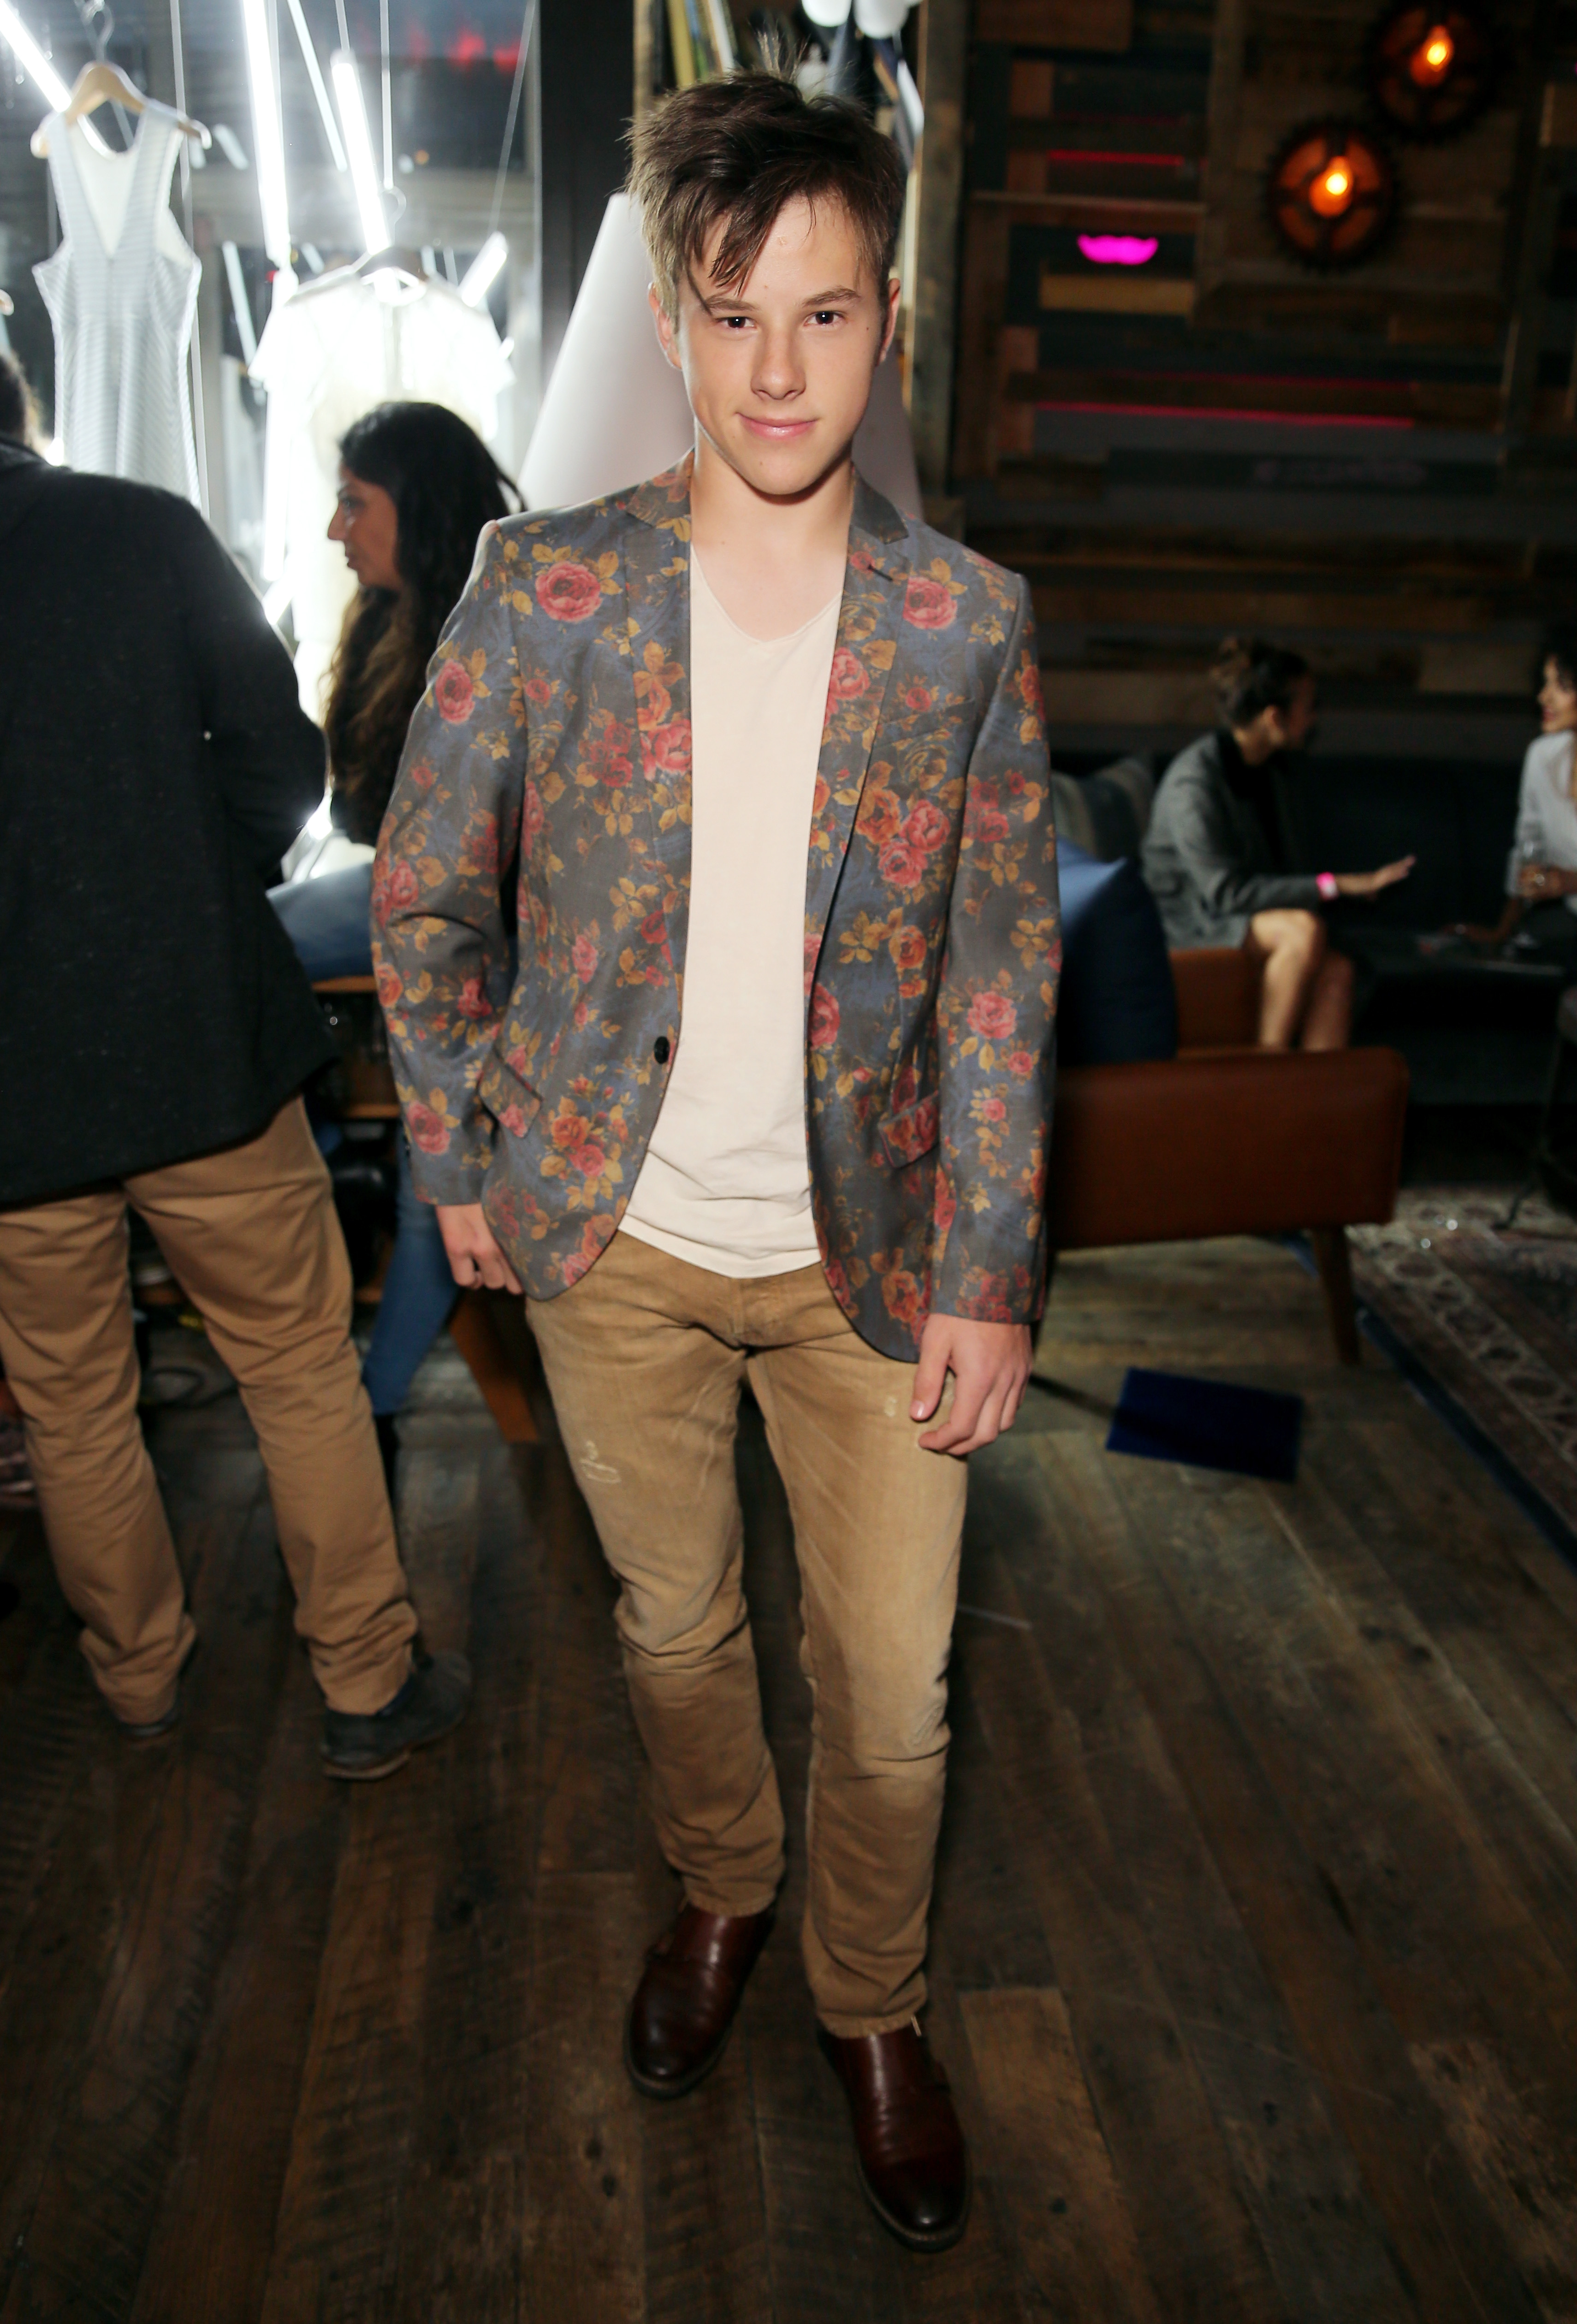 WEST HOLLYWOOD, CA - MAY 07:  Actor Nolan Gould attends the NYLON Young Hollywood Party presented by BCBGeneration at HYDE Sunset: Kitchen + Cocktails on May 7, 2015 in West Hollywood, California.  (Photo by Chelsea Lauren/Getty Images for NYLON)